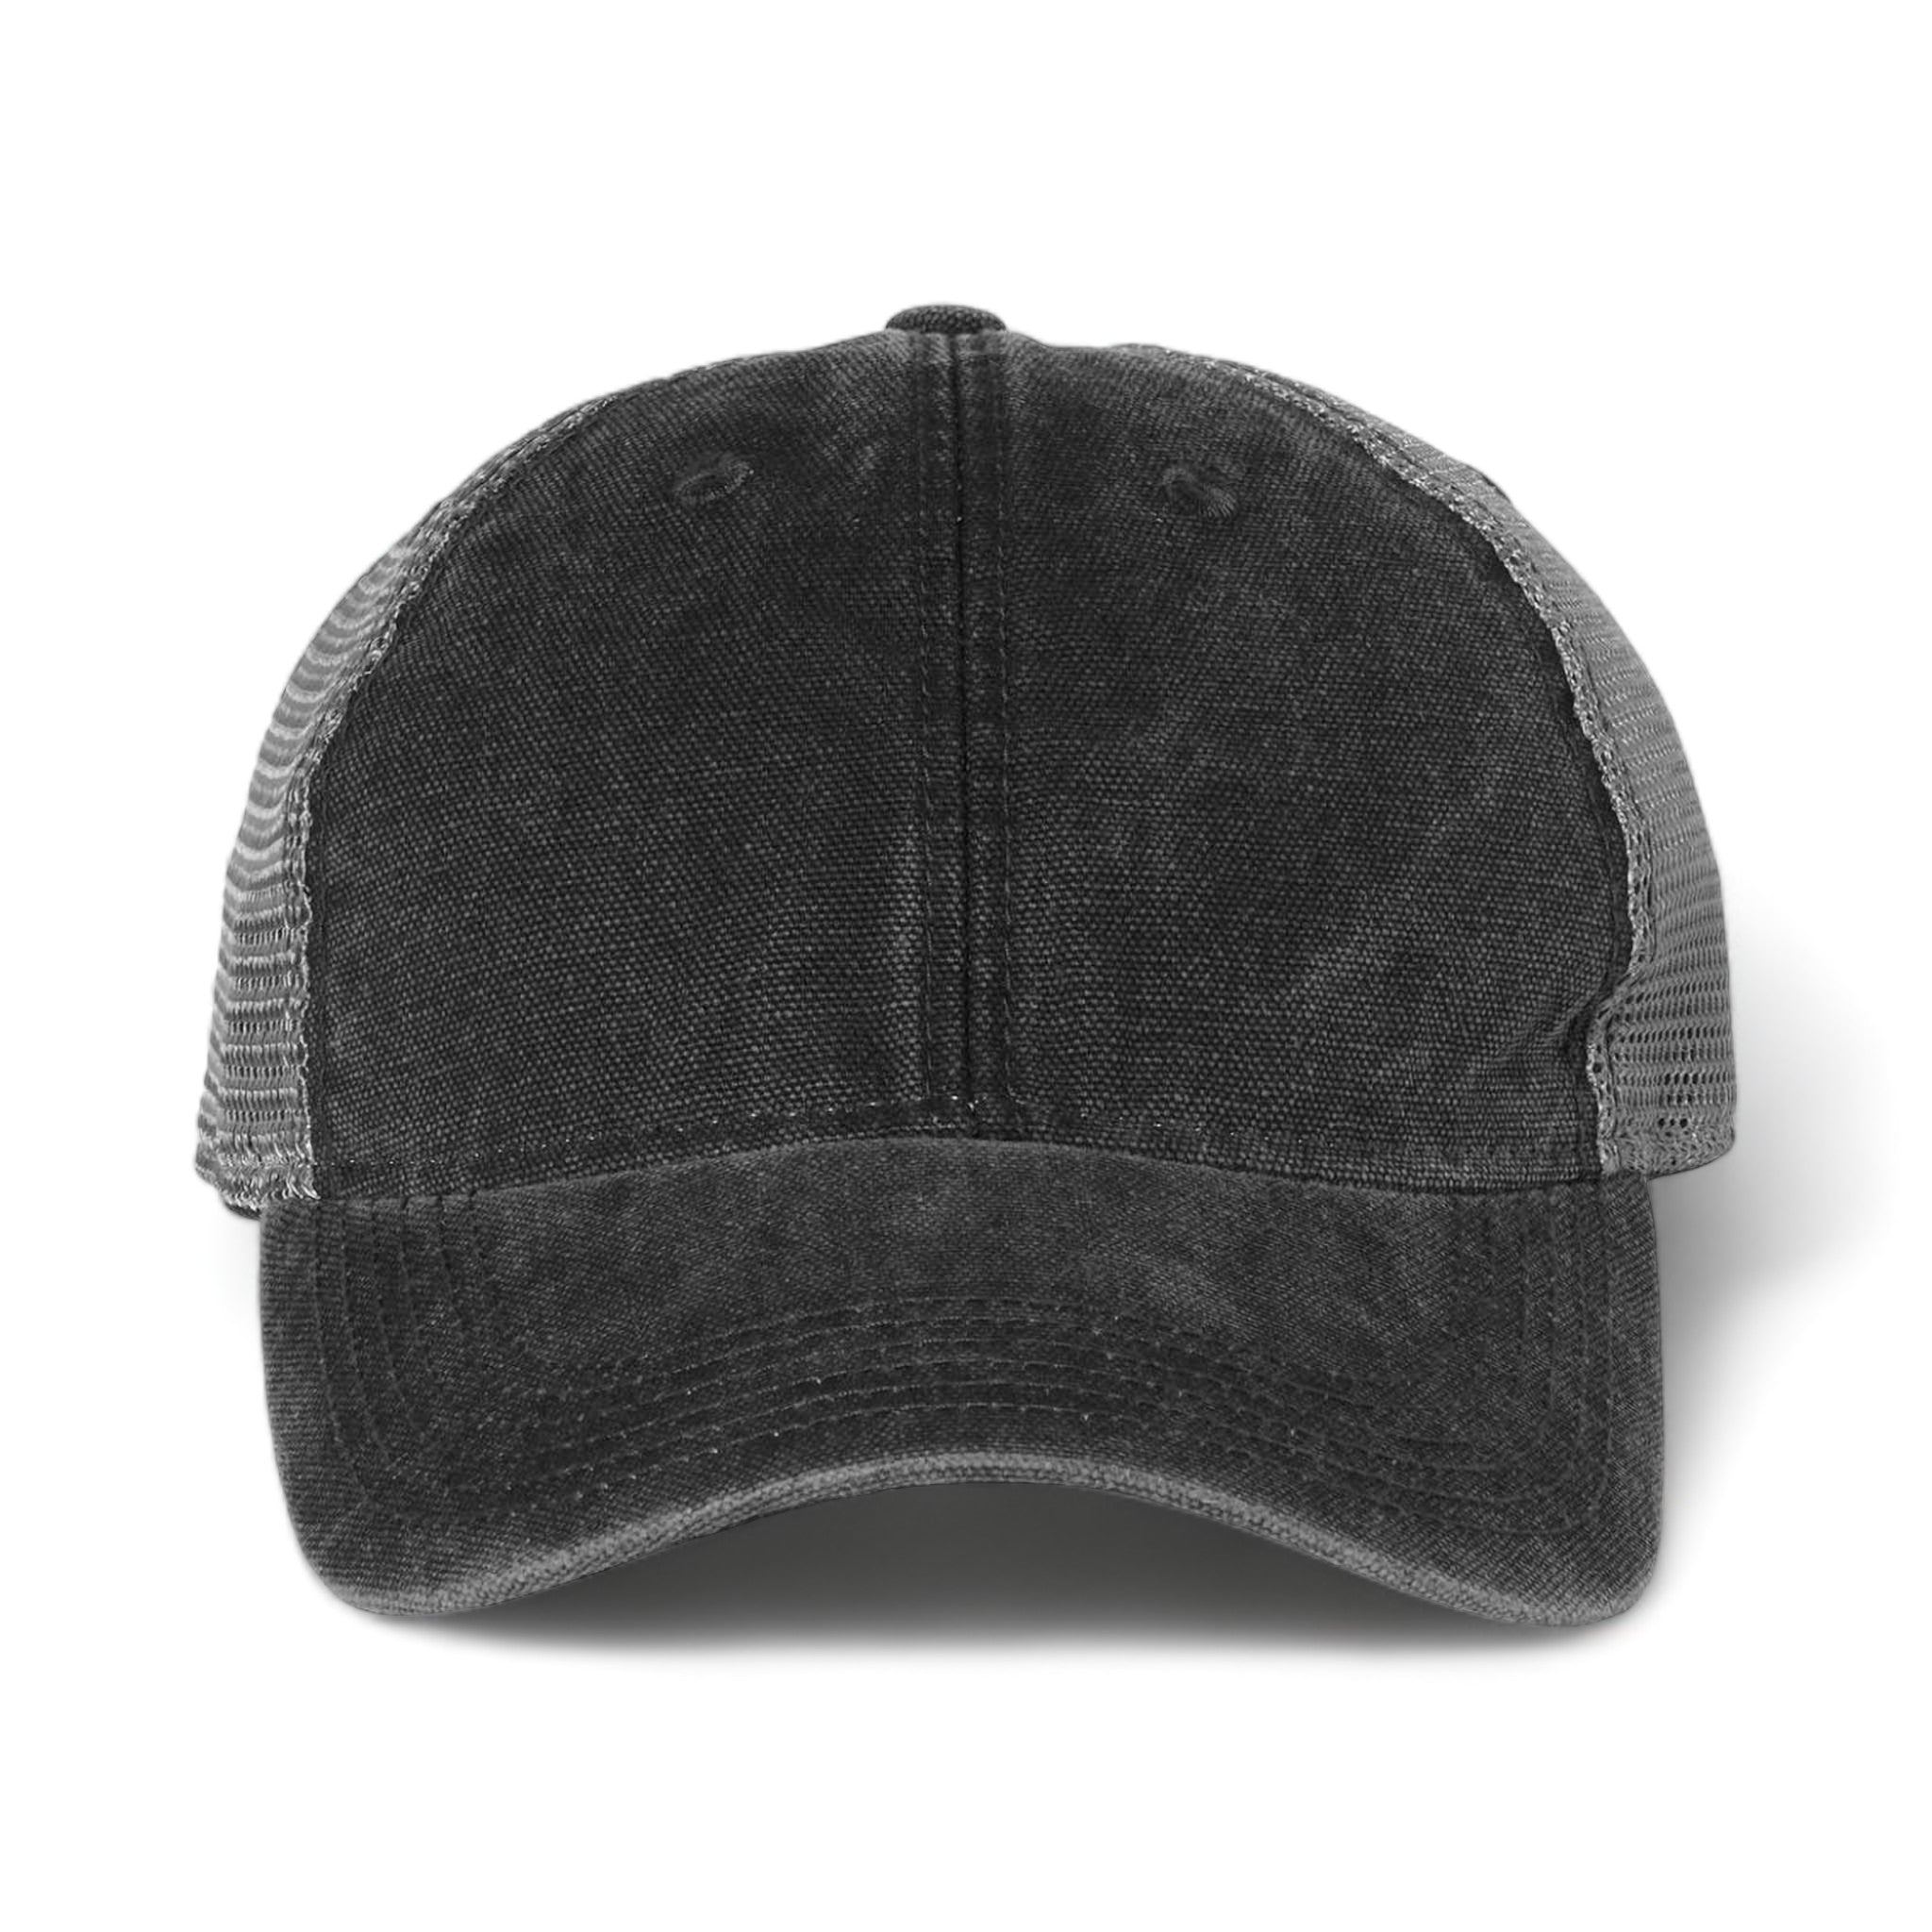 Front view of LEGACY DTA custom hat in black and grey